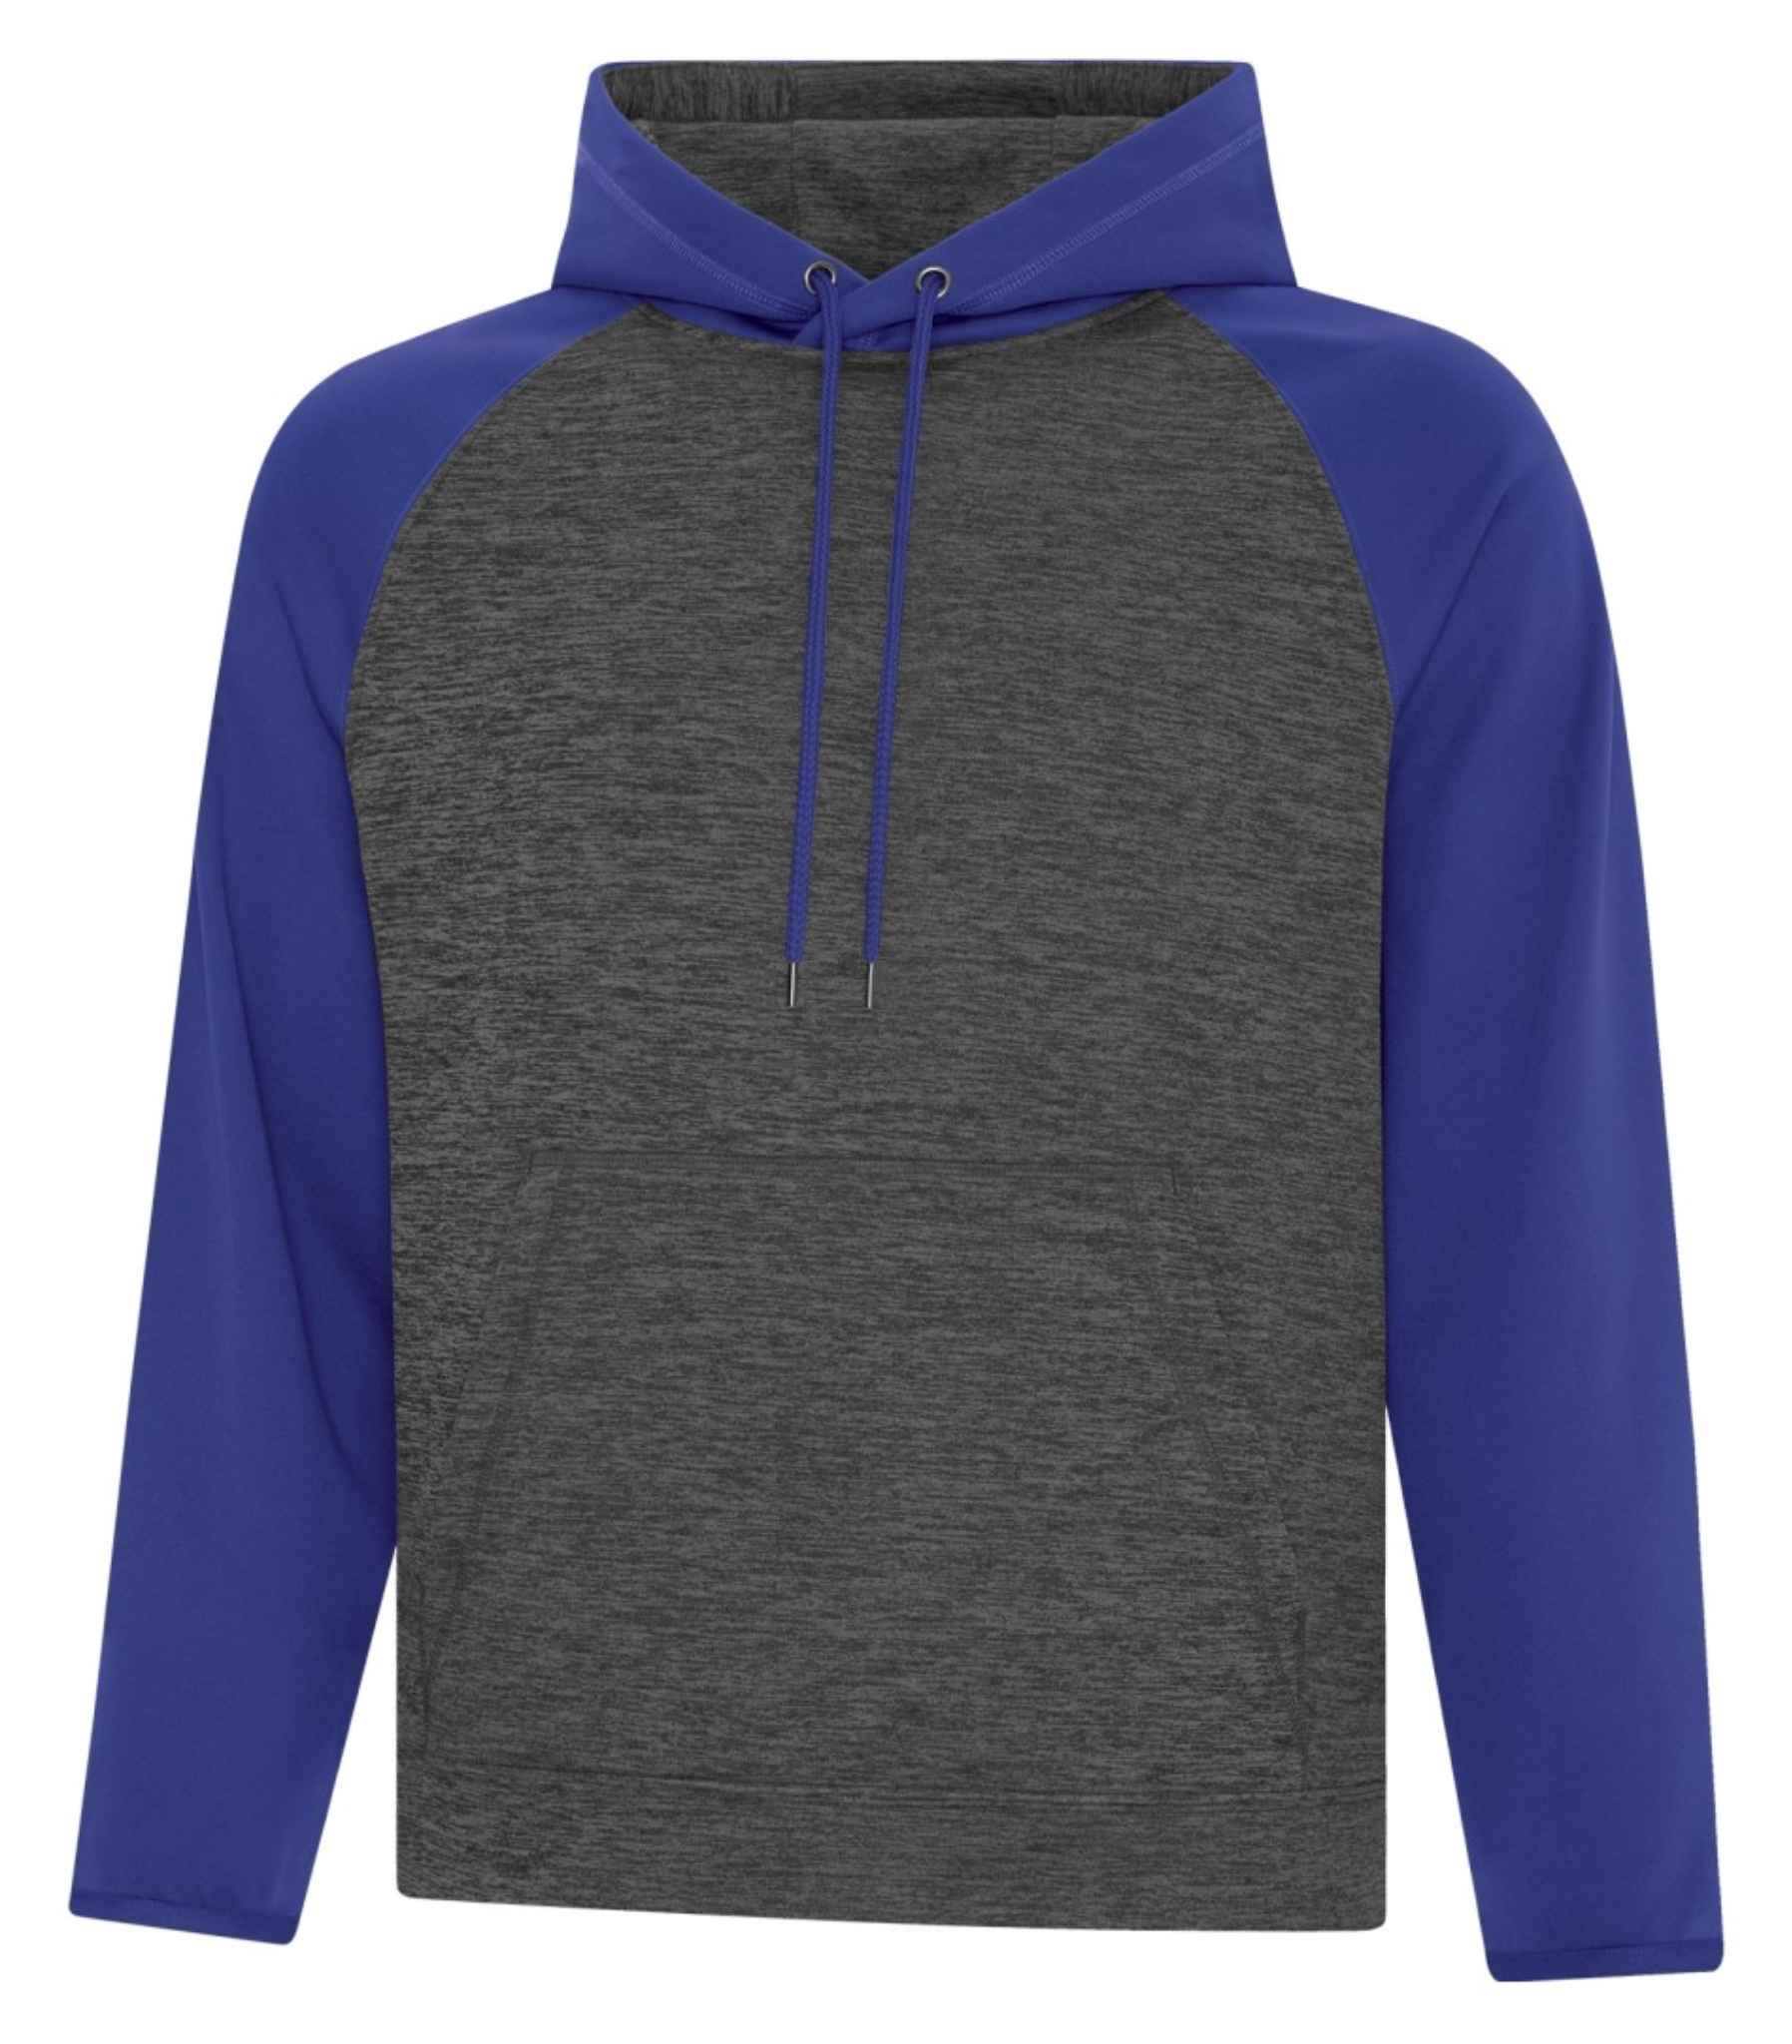 Charcoal Dynamic_True Royal Blue Adult Hoodie - Polyester - ATC F2047